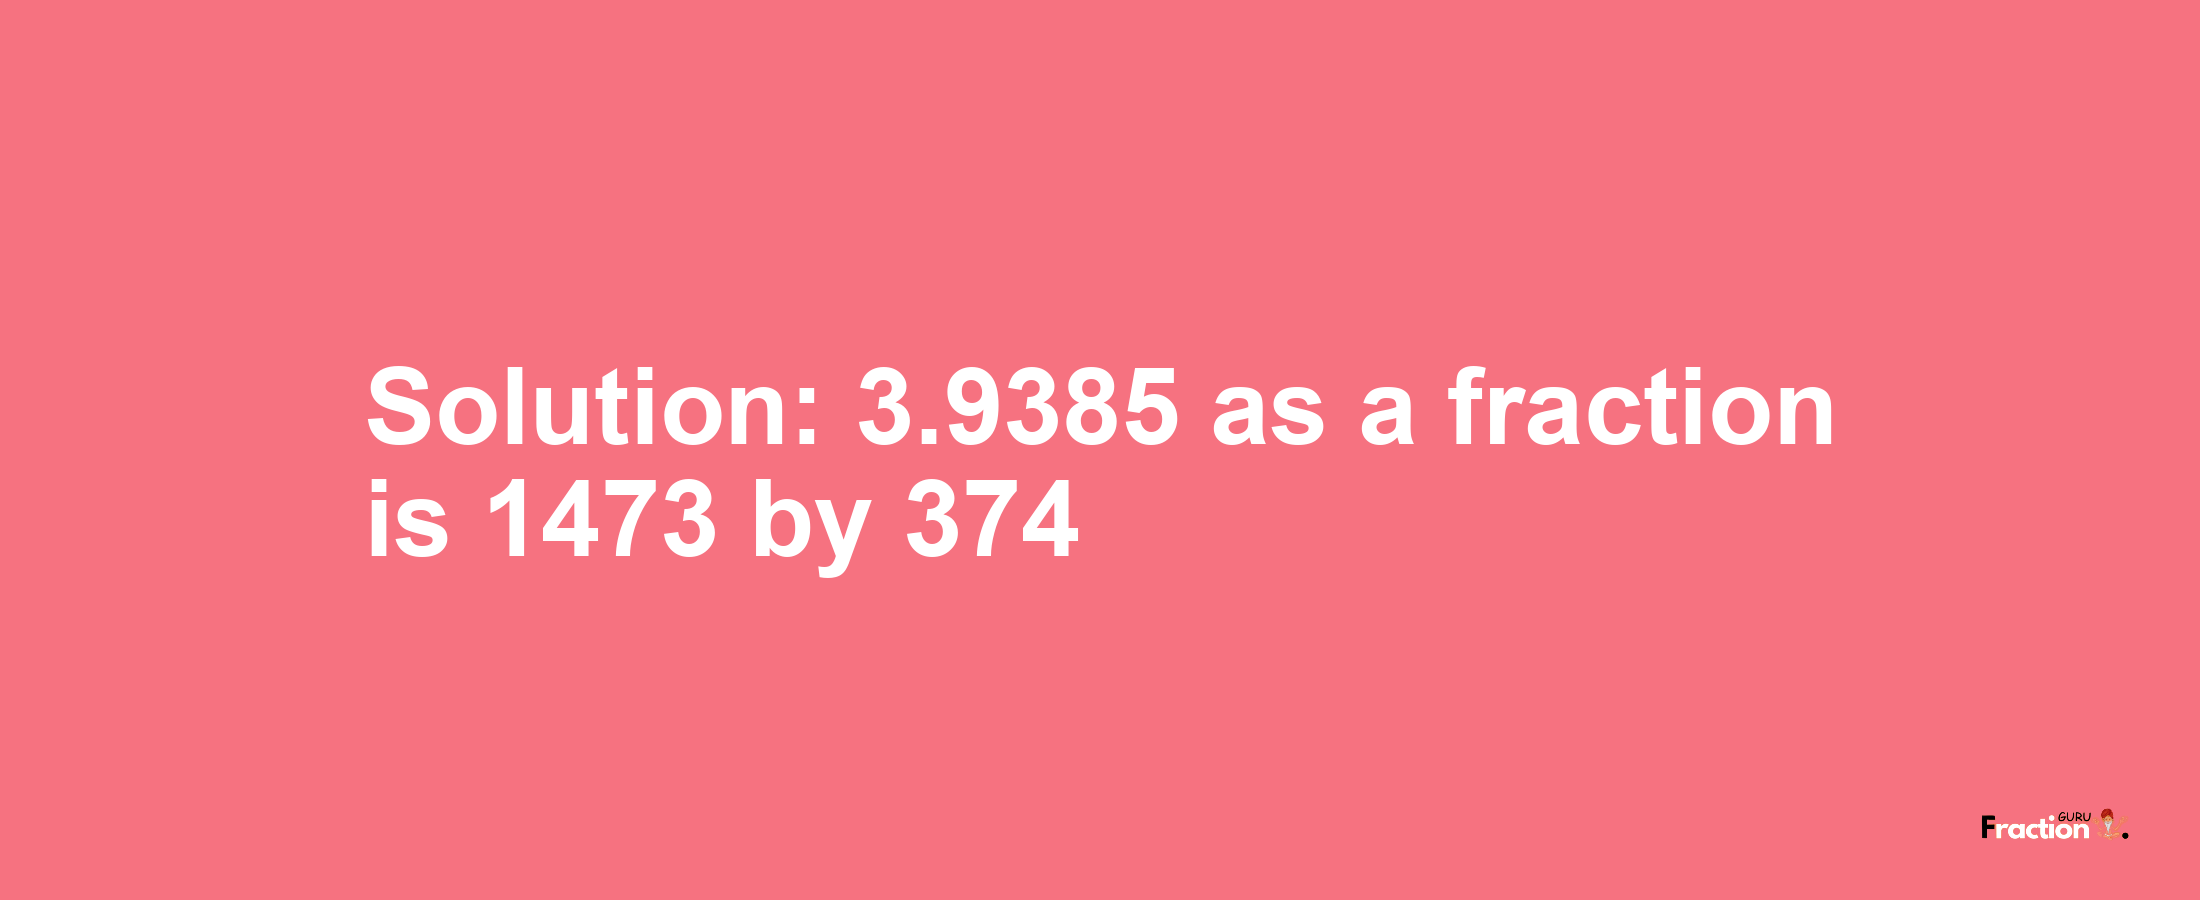 Solution:3.9385 as a fraction is 1473/374